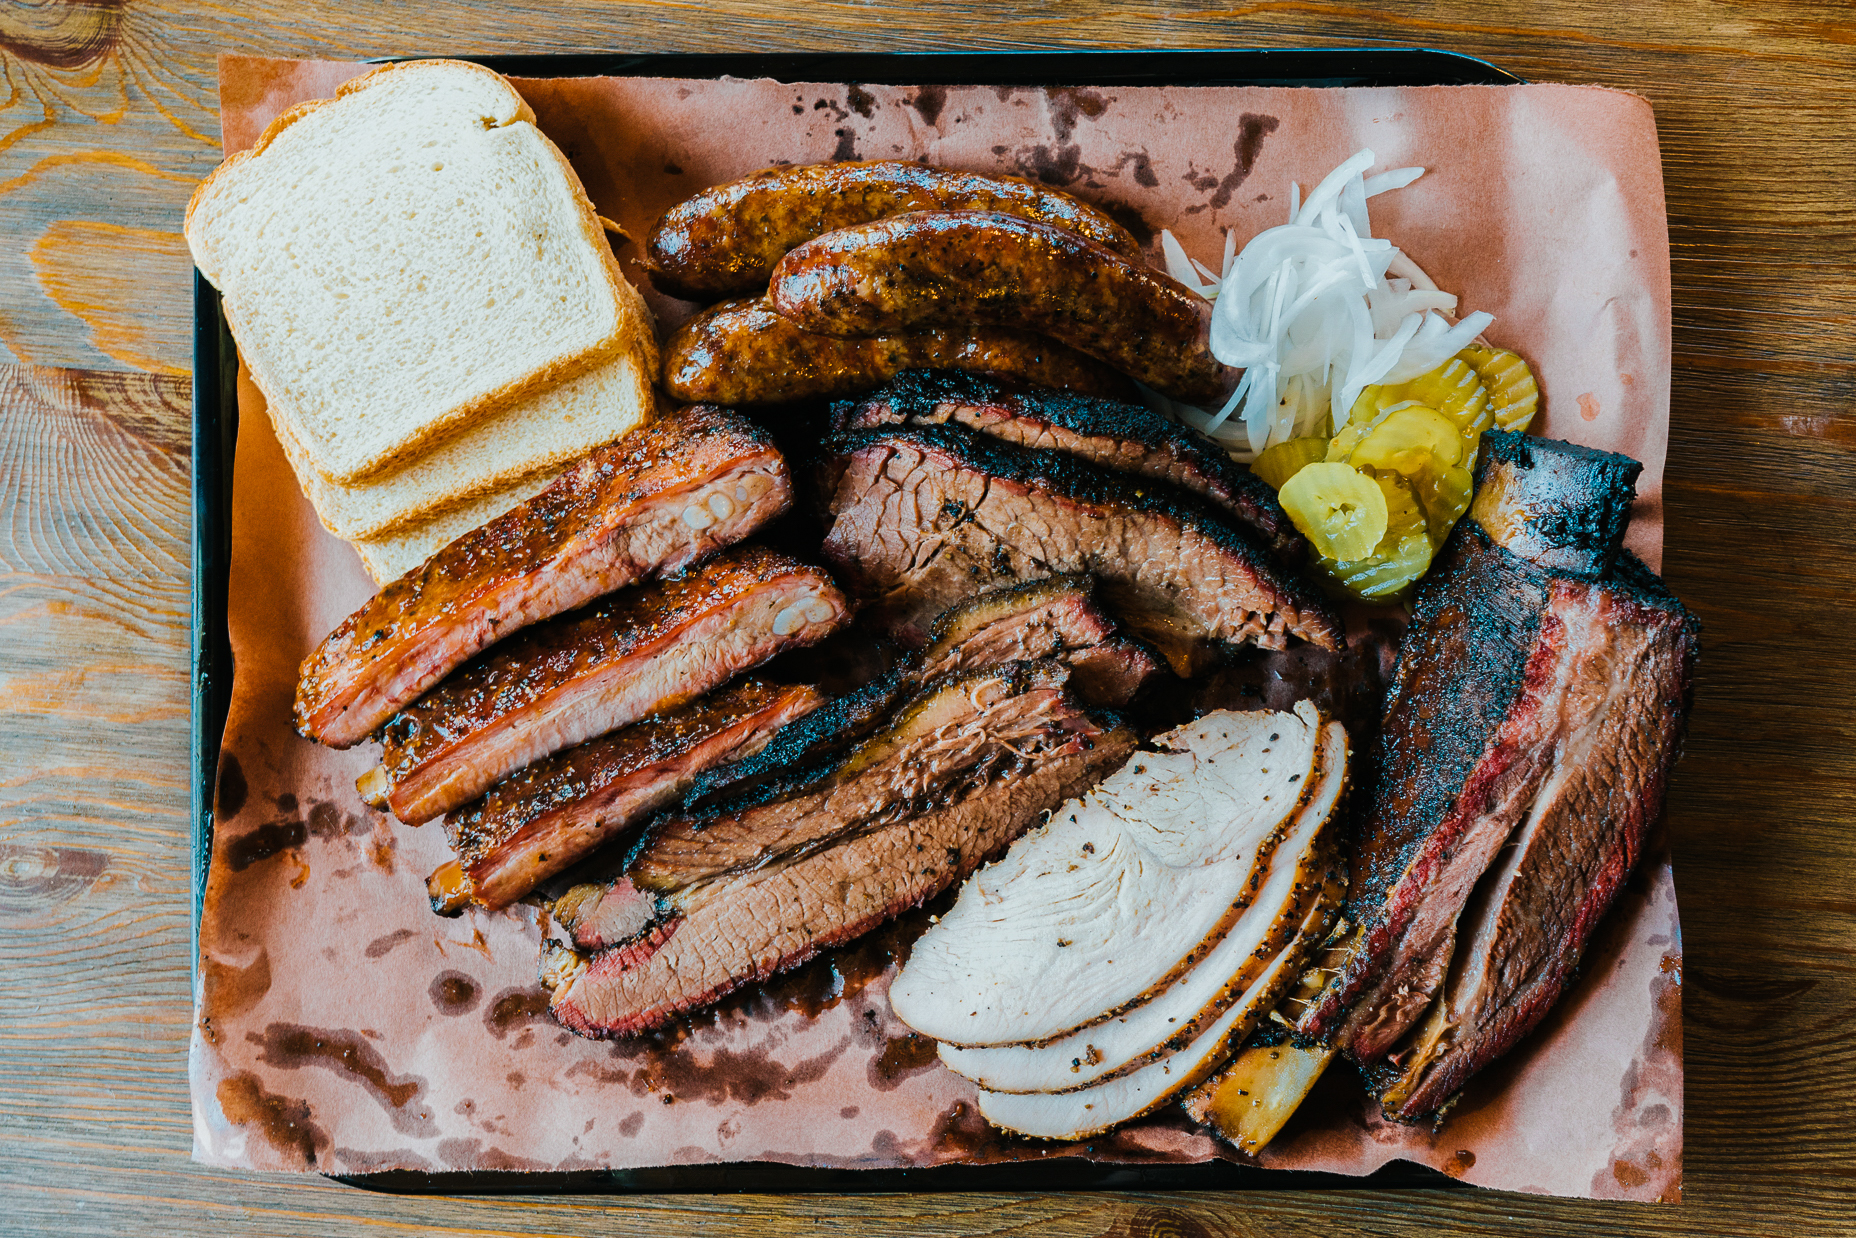 Horn Barbecue’s barbecue